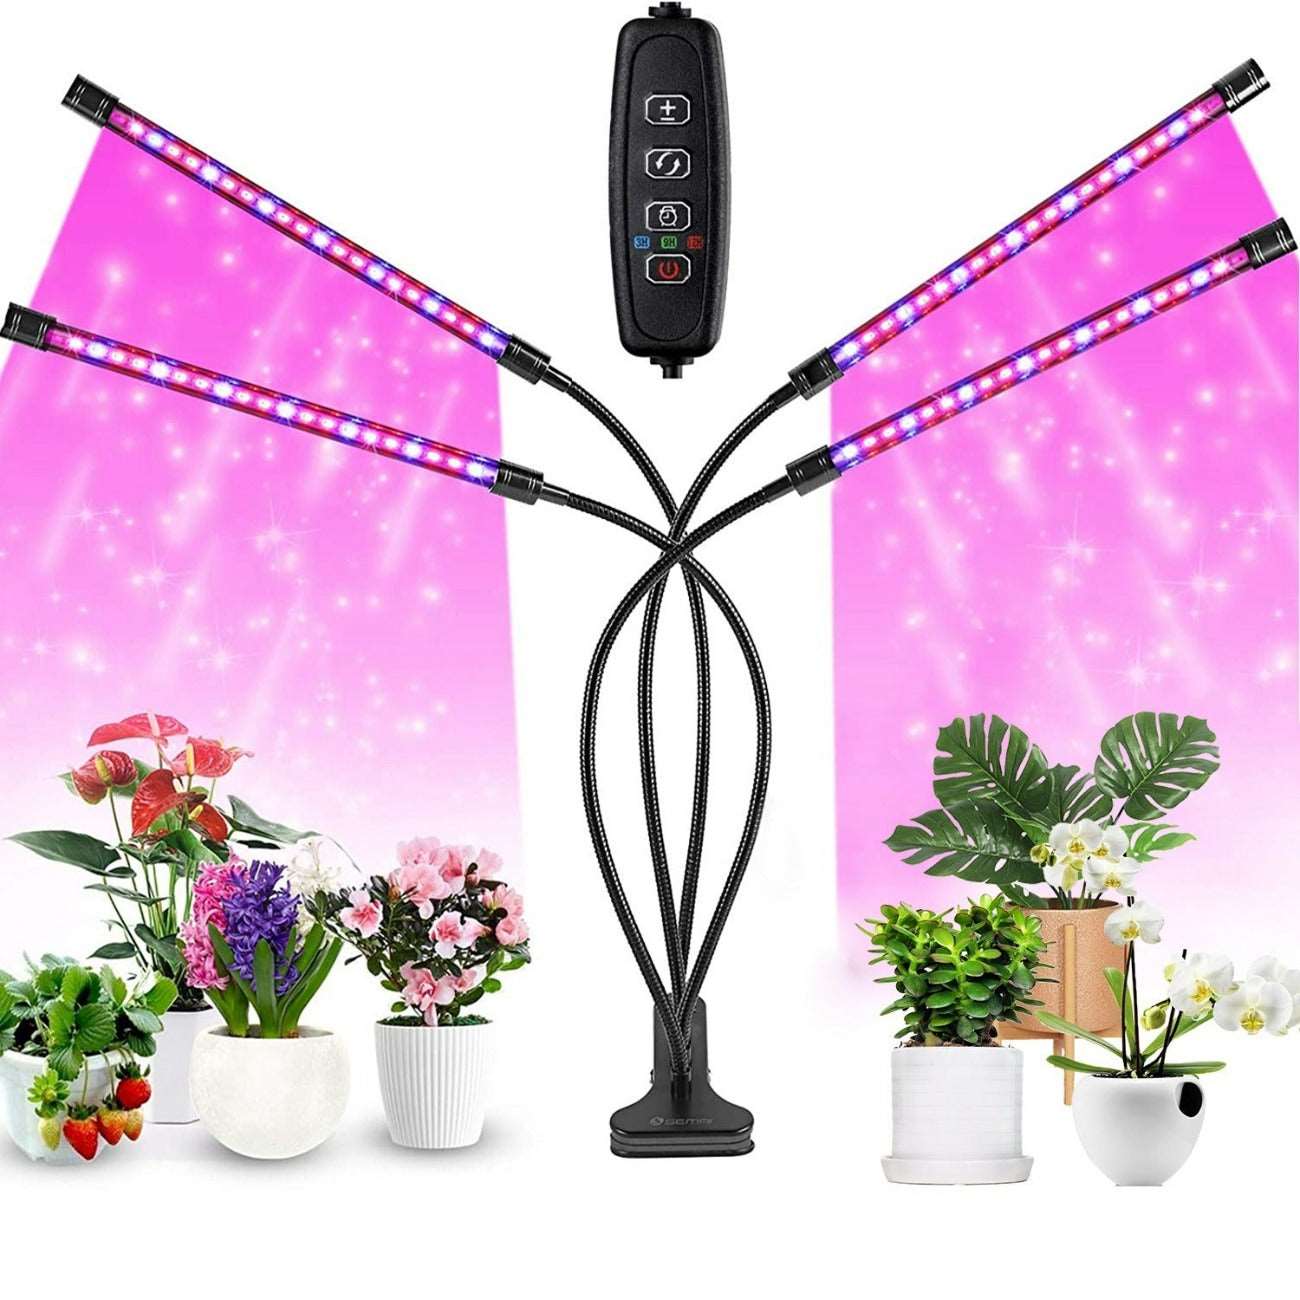 Dimmable LED Grow Lights for Indoor Plants